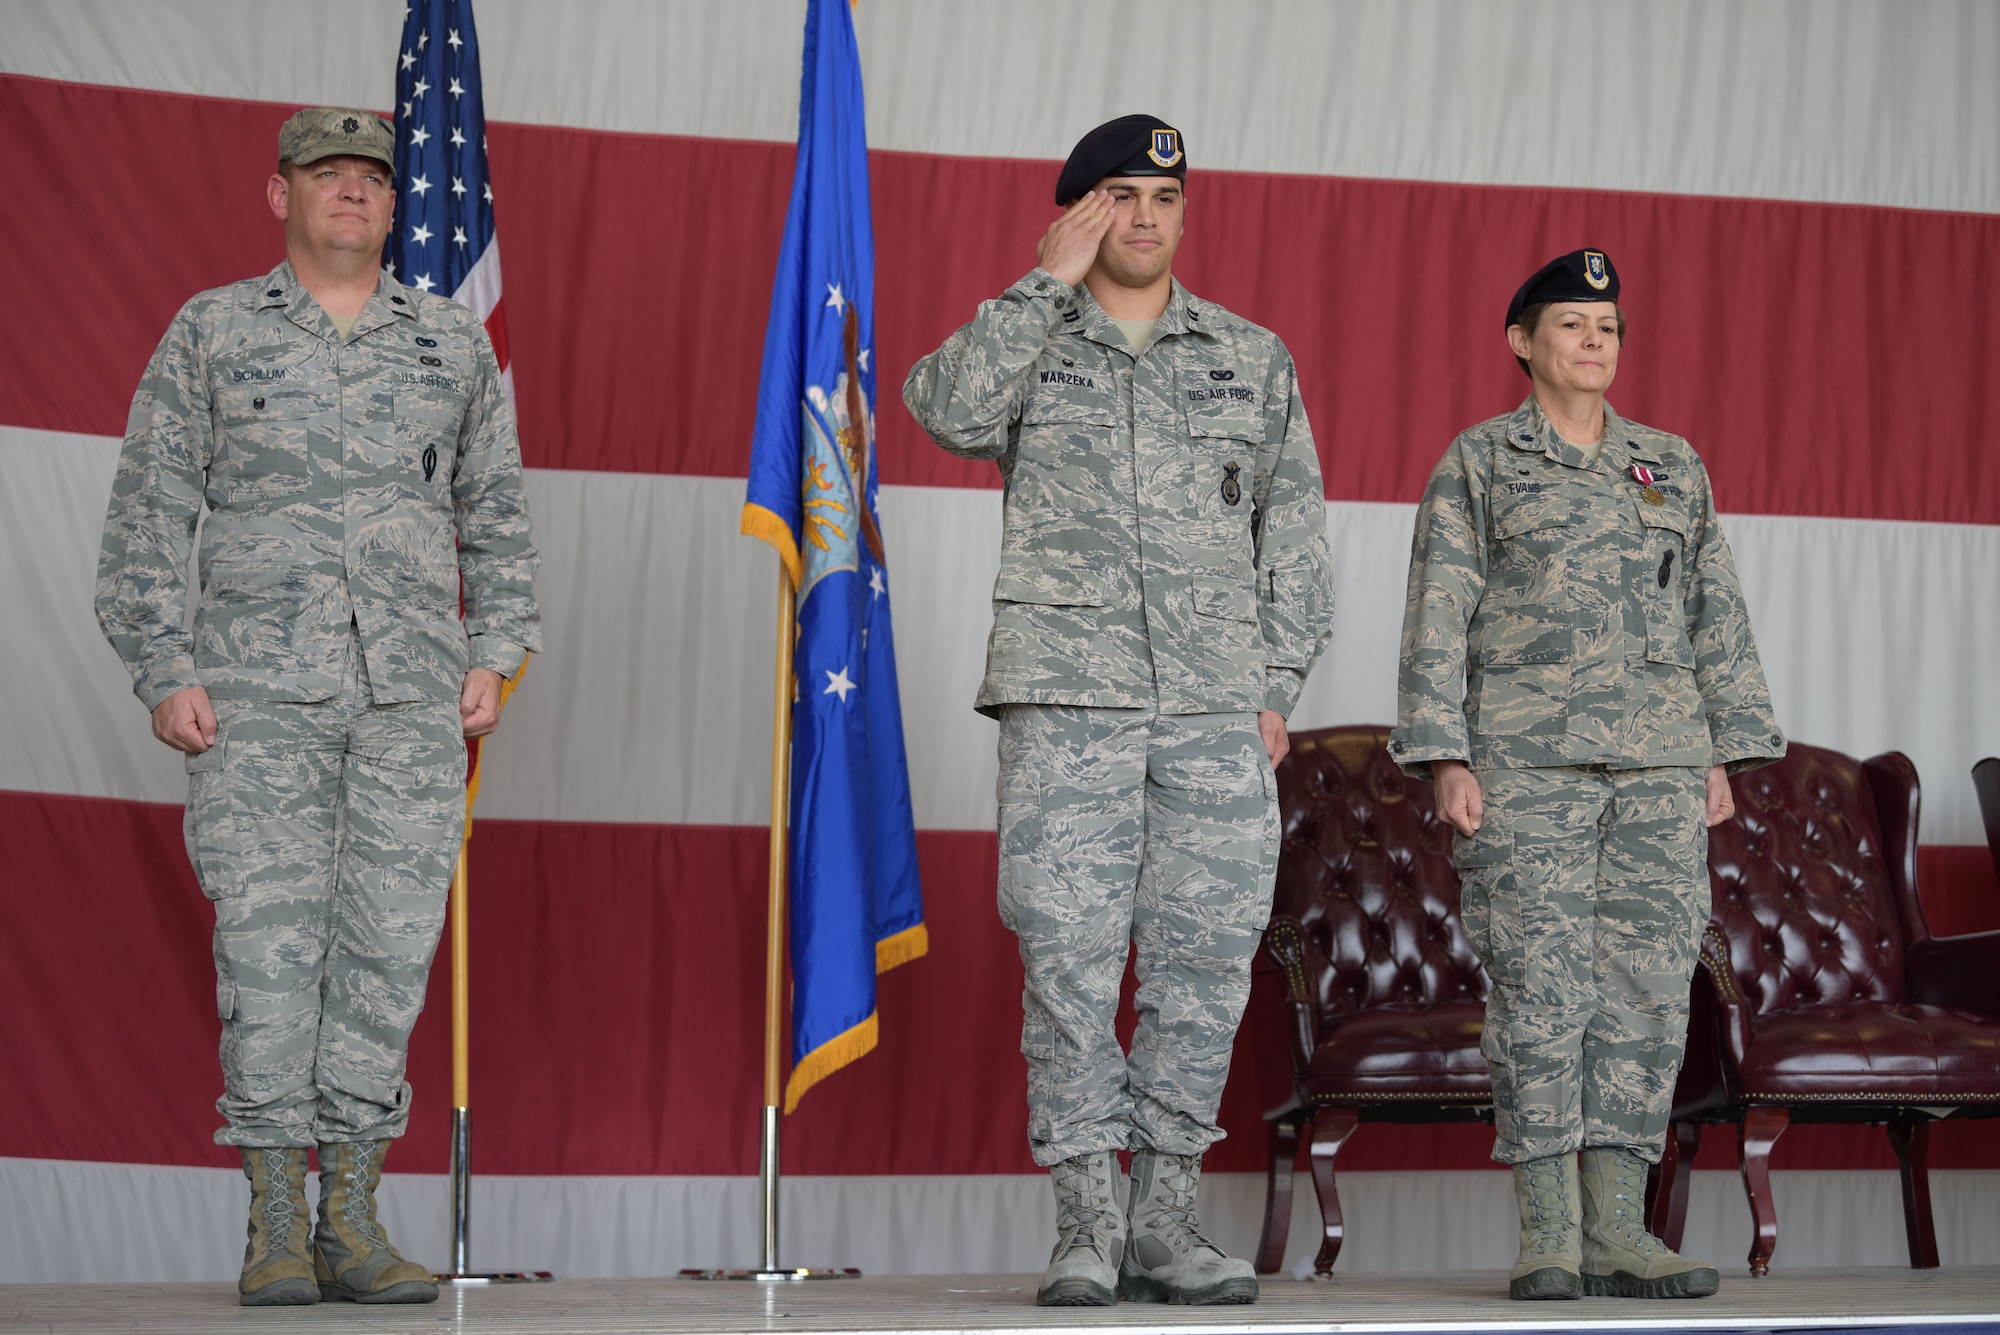 Capt. Jonathan Warzeka, 944th Security Forces Squadron incoming commander, renders his first salute to the Airmen of the 944 SFS after taking command during a ceremony held at Hangar 999, Jan. 6, 2018.